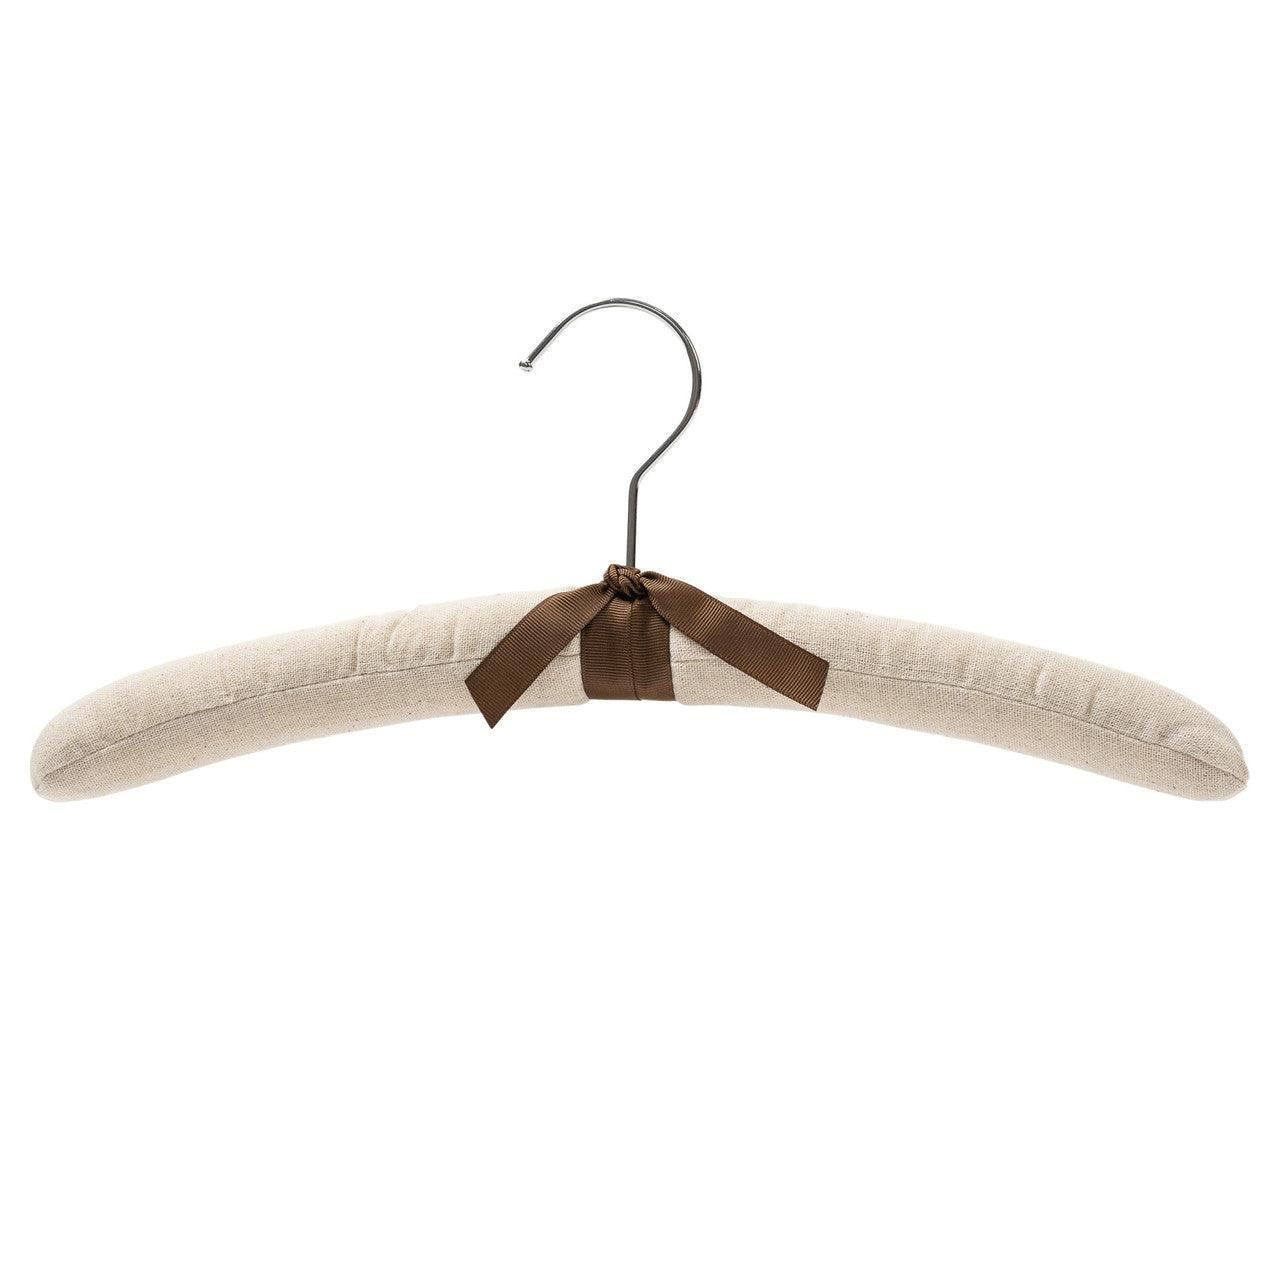 Padded Coat Hangers With Chrome Hook - Natural linen - 38cm X 45mm Thick (Sold in Bundles of 25/50) - Hangersforless